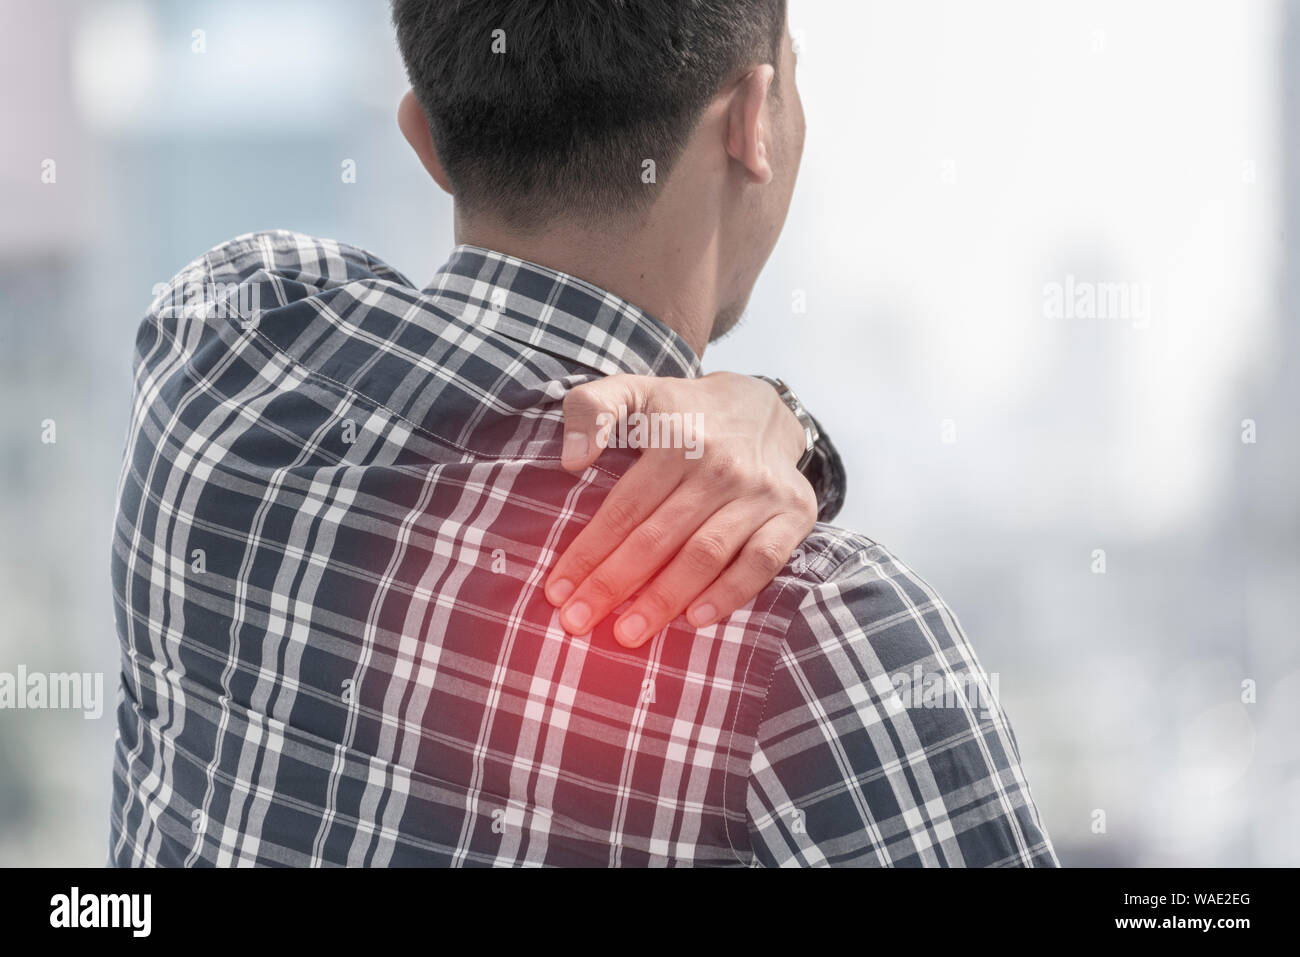 Back painful. office syndrome. health care concept. Stock Photo